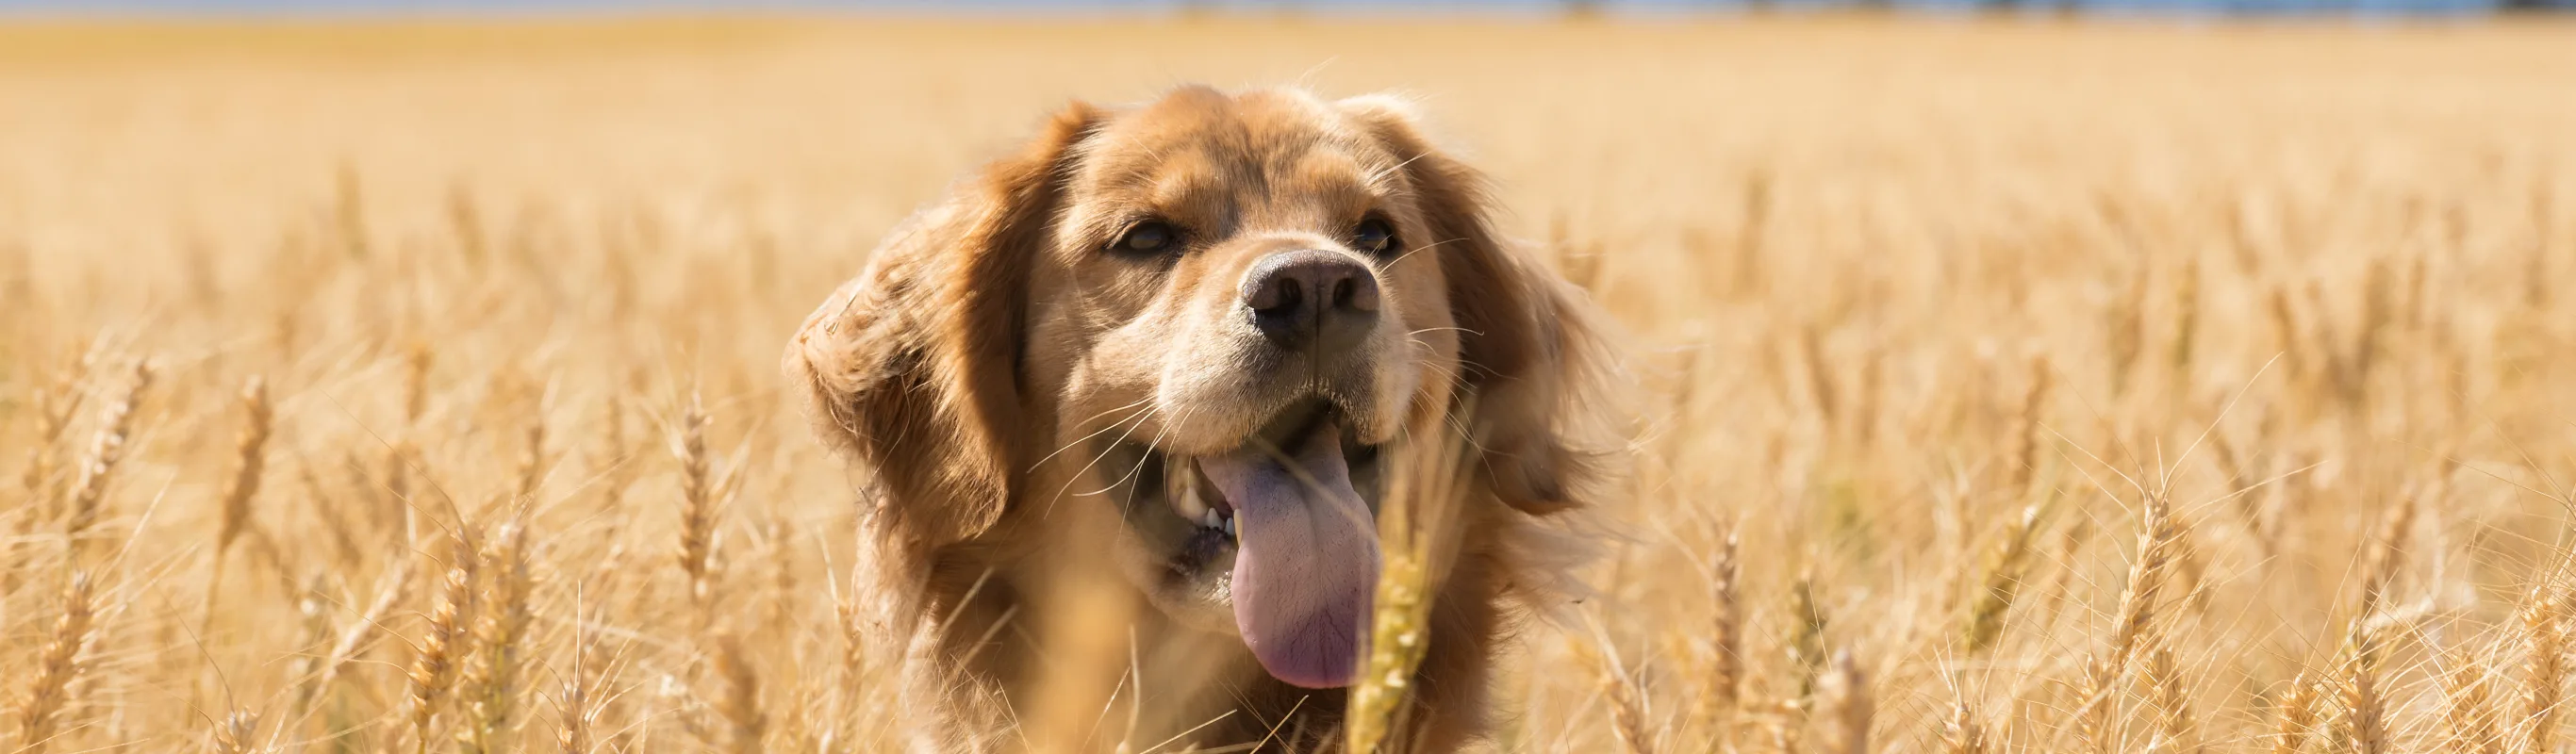 Labrador Retriever sitting in a wheat field with it's tongue out, happy 